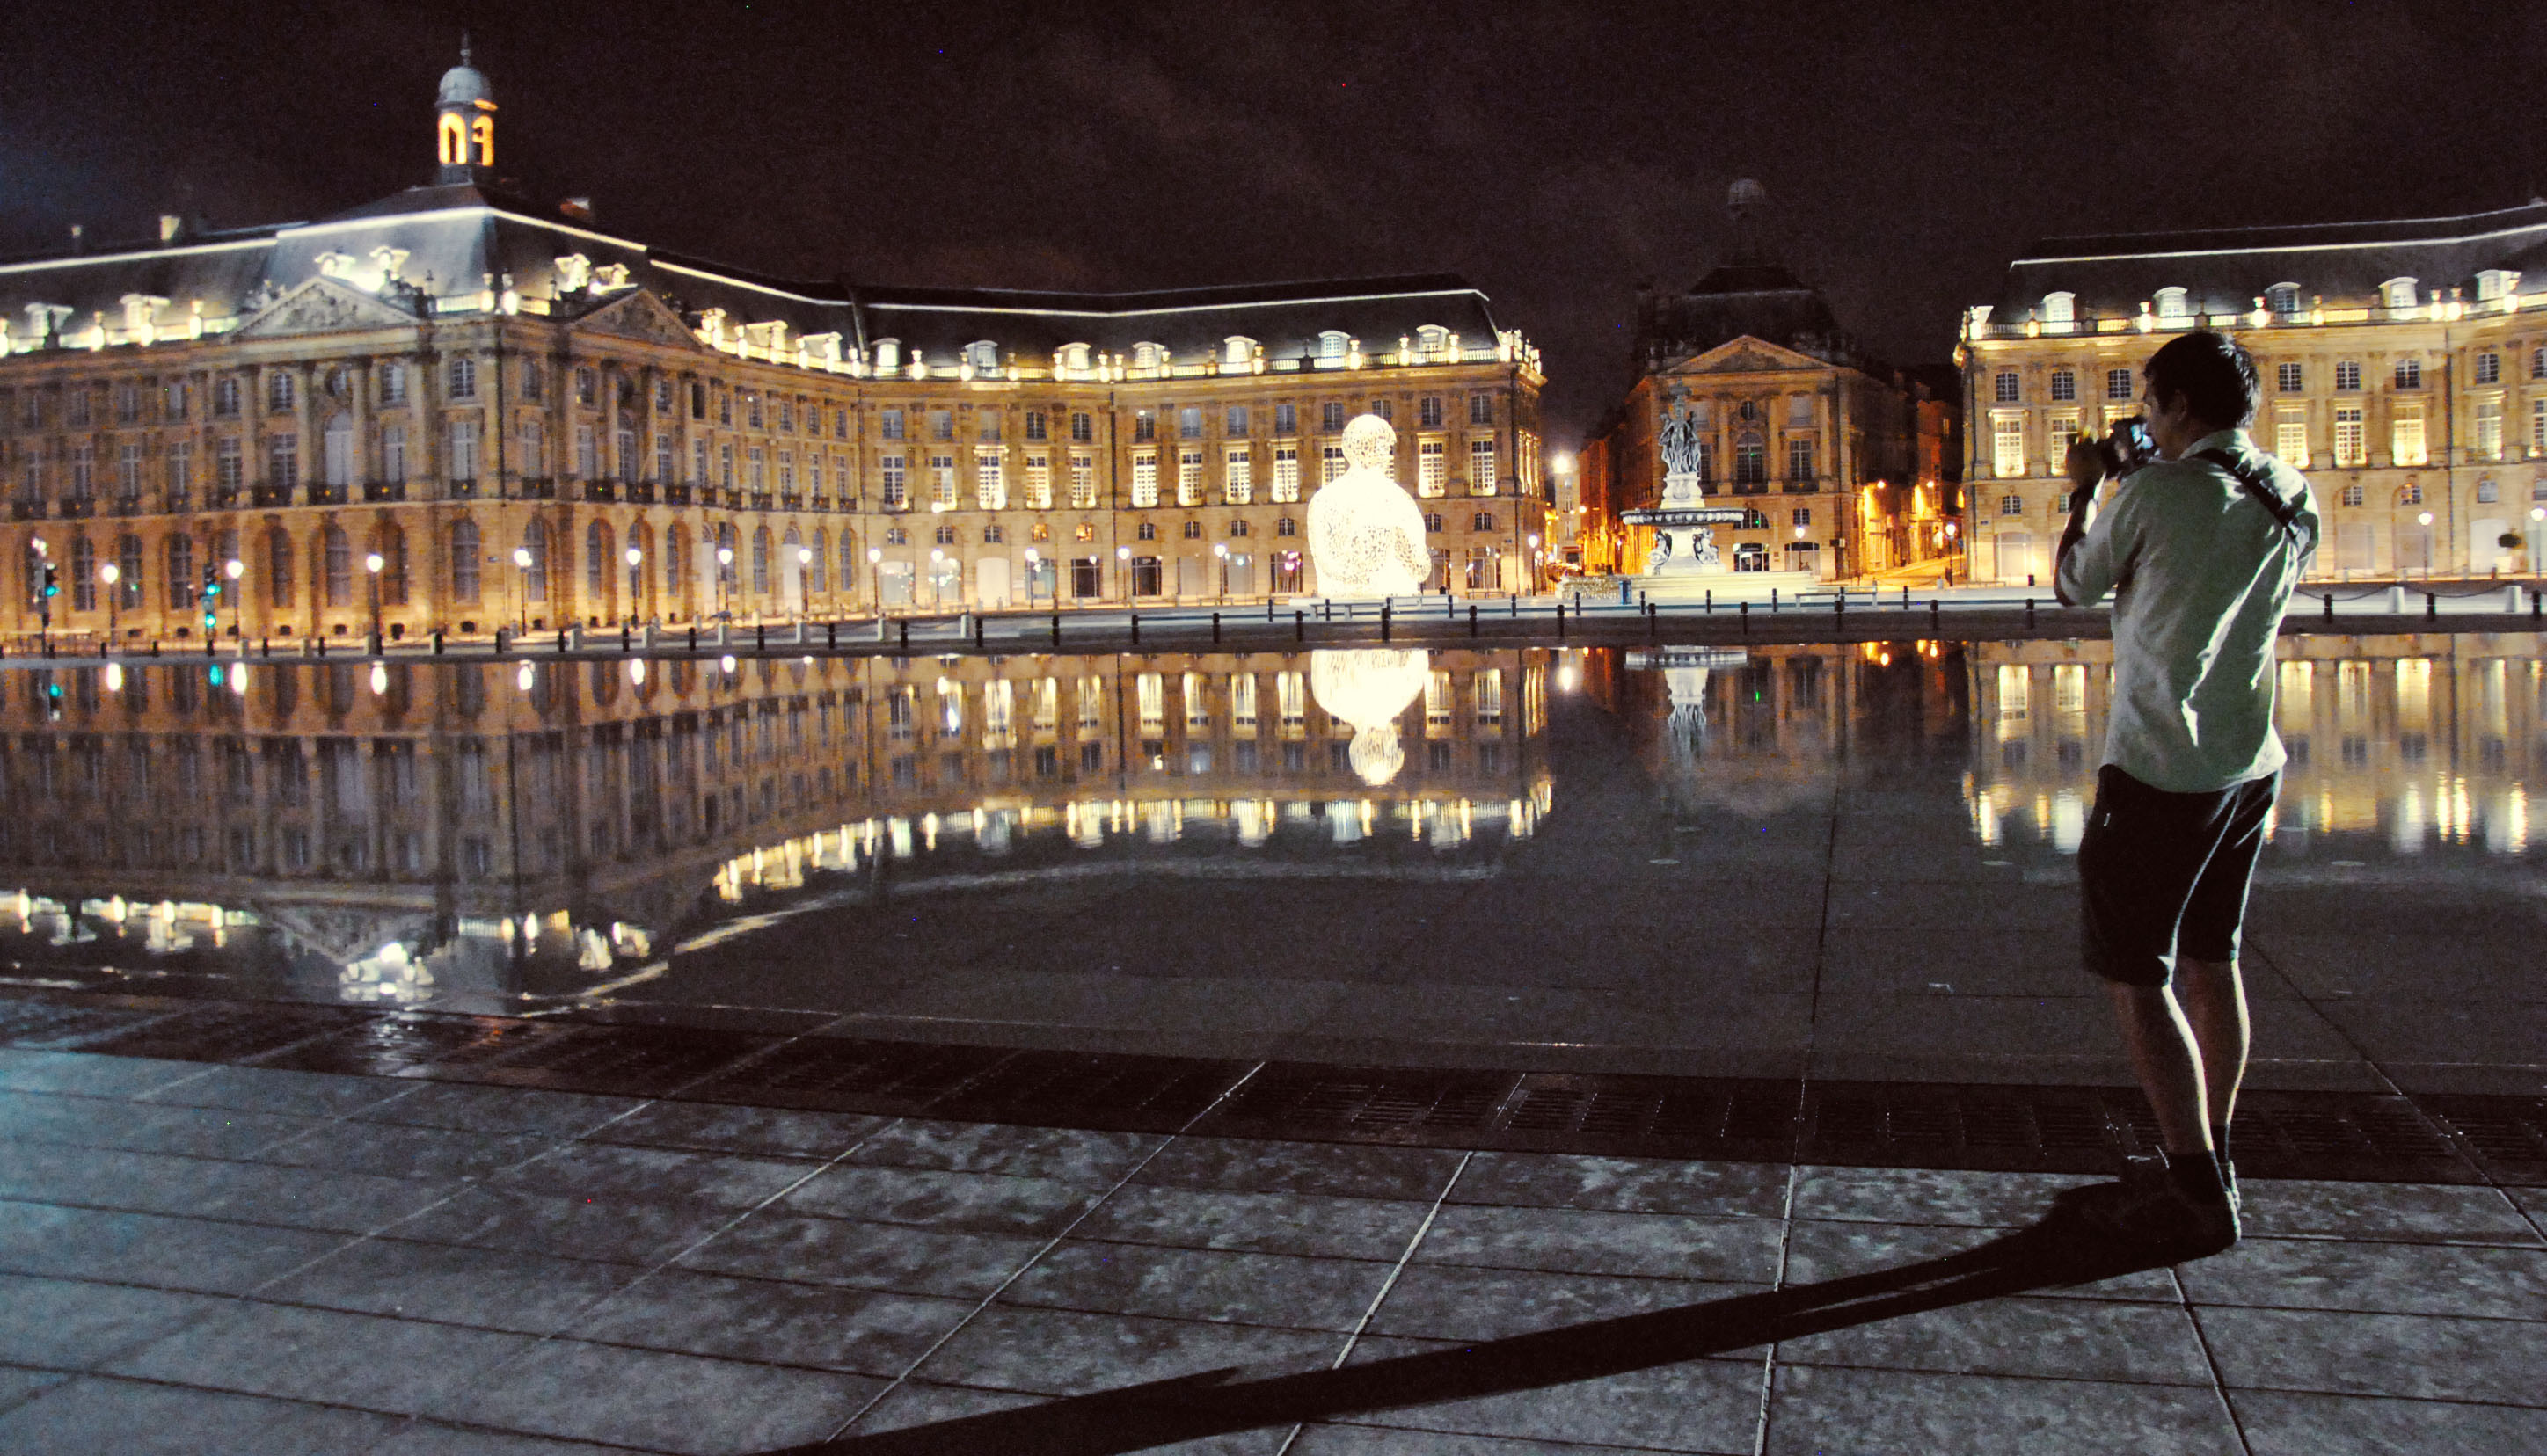 MIRROIRE NICO BY NIGHT